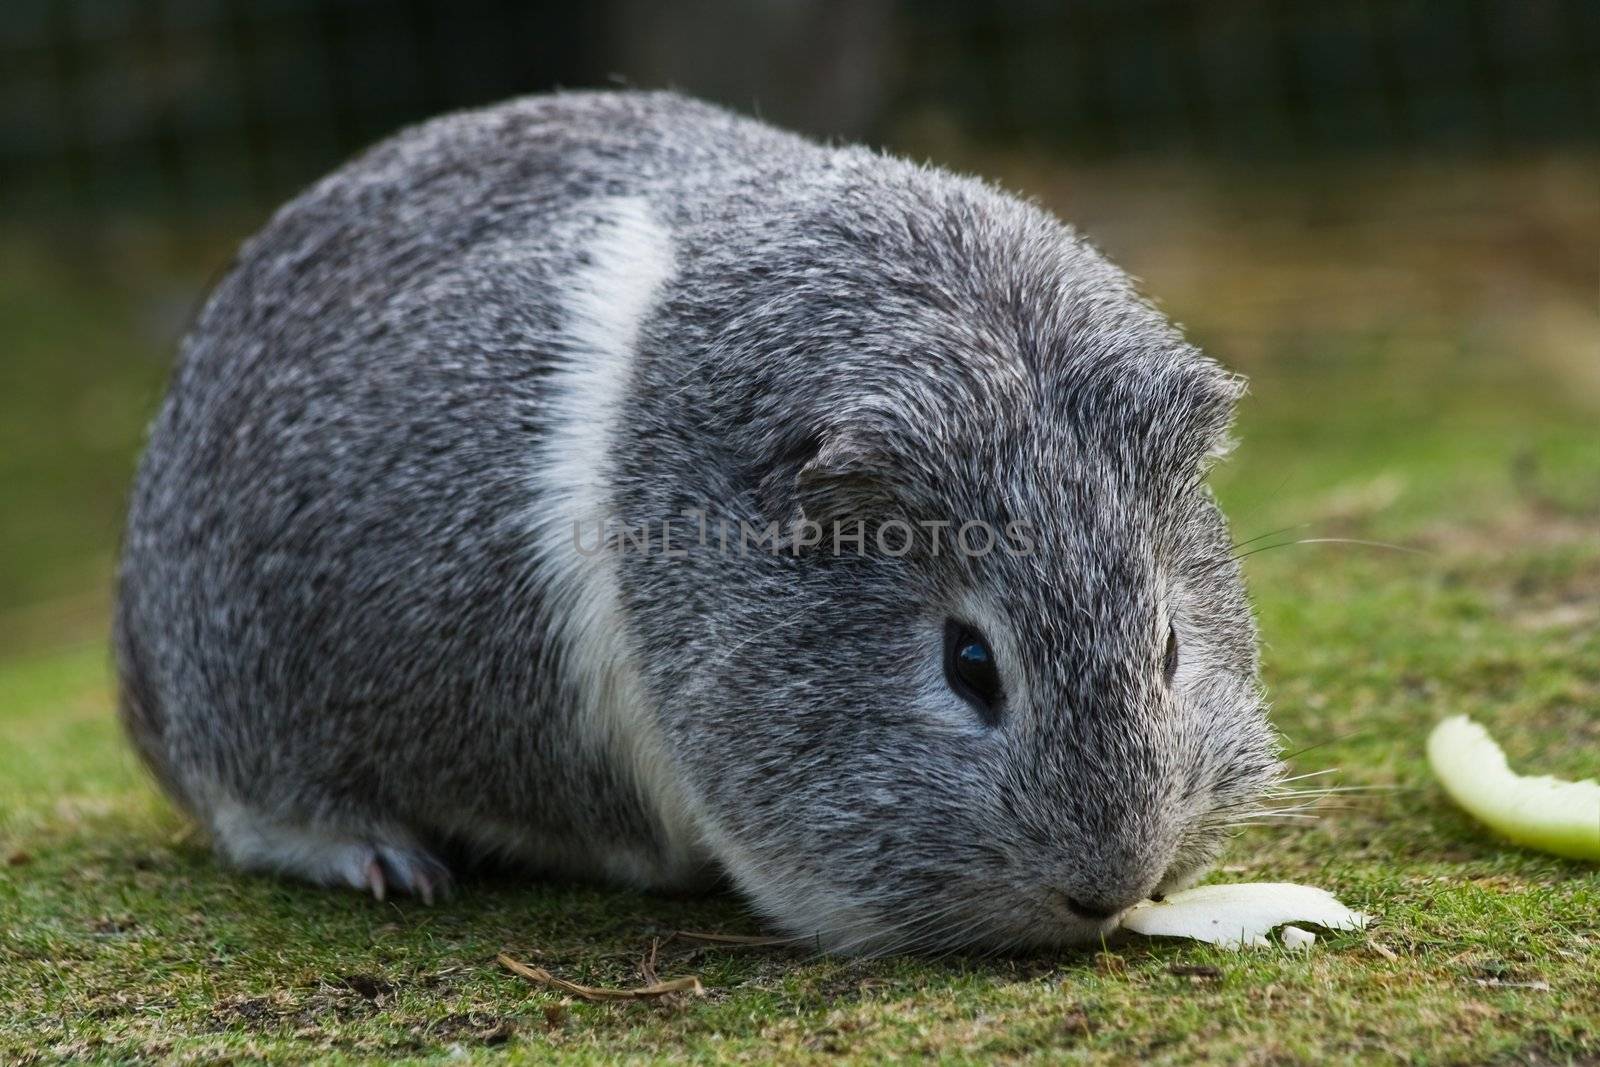 Grey and white Guinea pig or Cavy by Colette